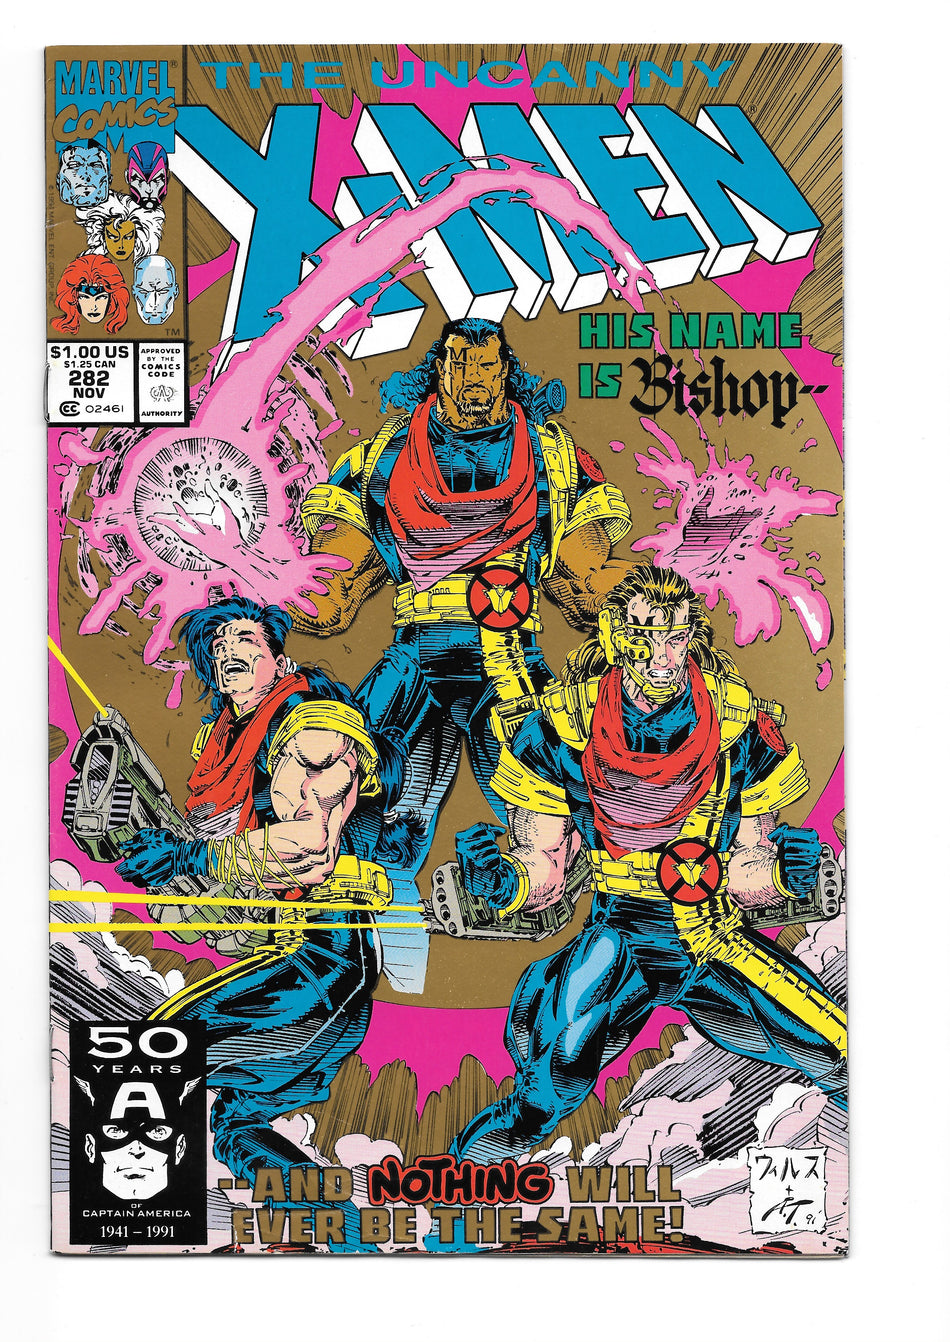 Photo of Uncanny X-Men, Vol. 1 (1991)  Iss 282C Near Mint -  Comic sold by Stronghold Collectibles